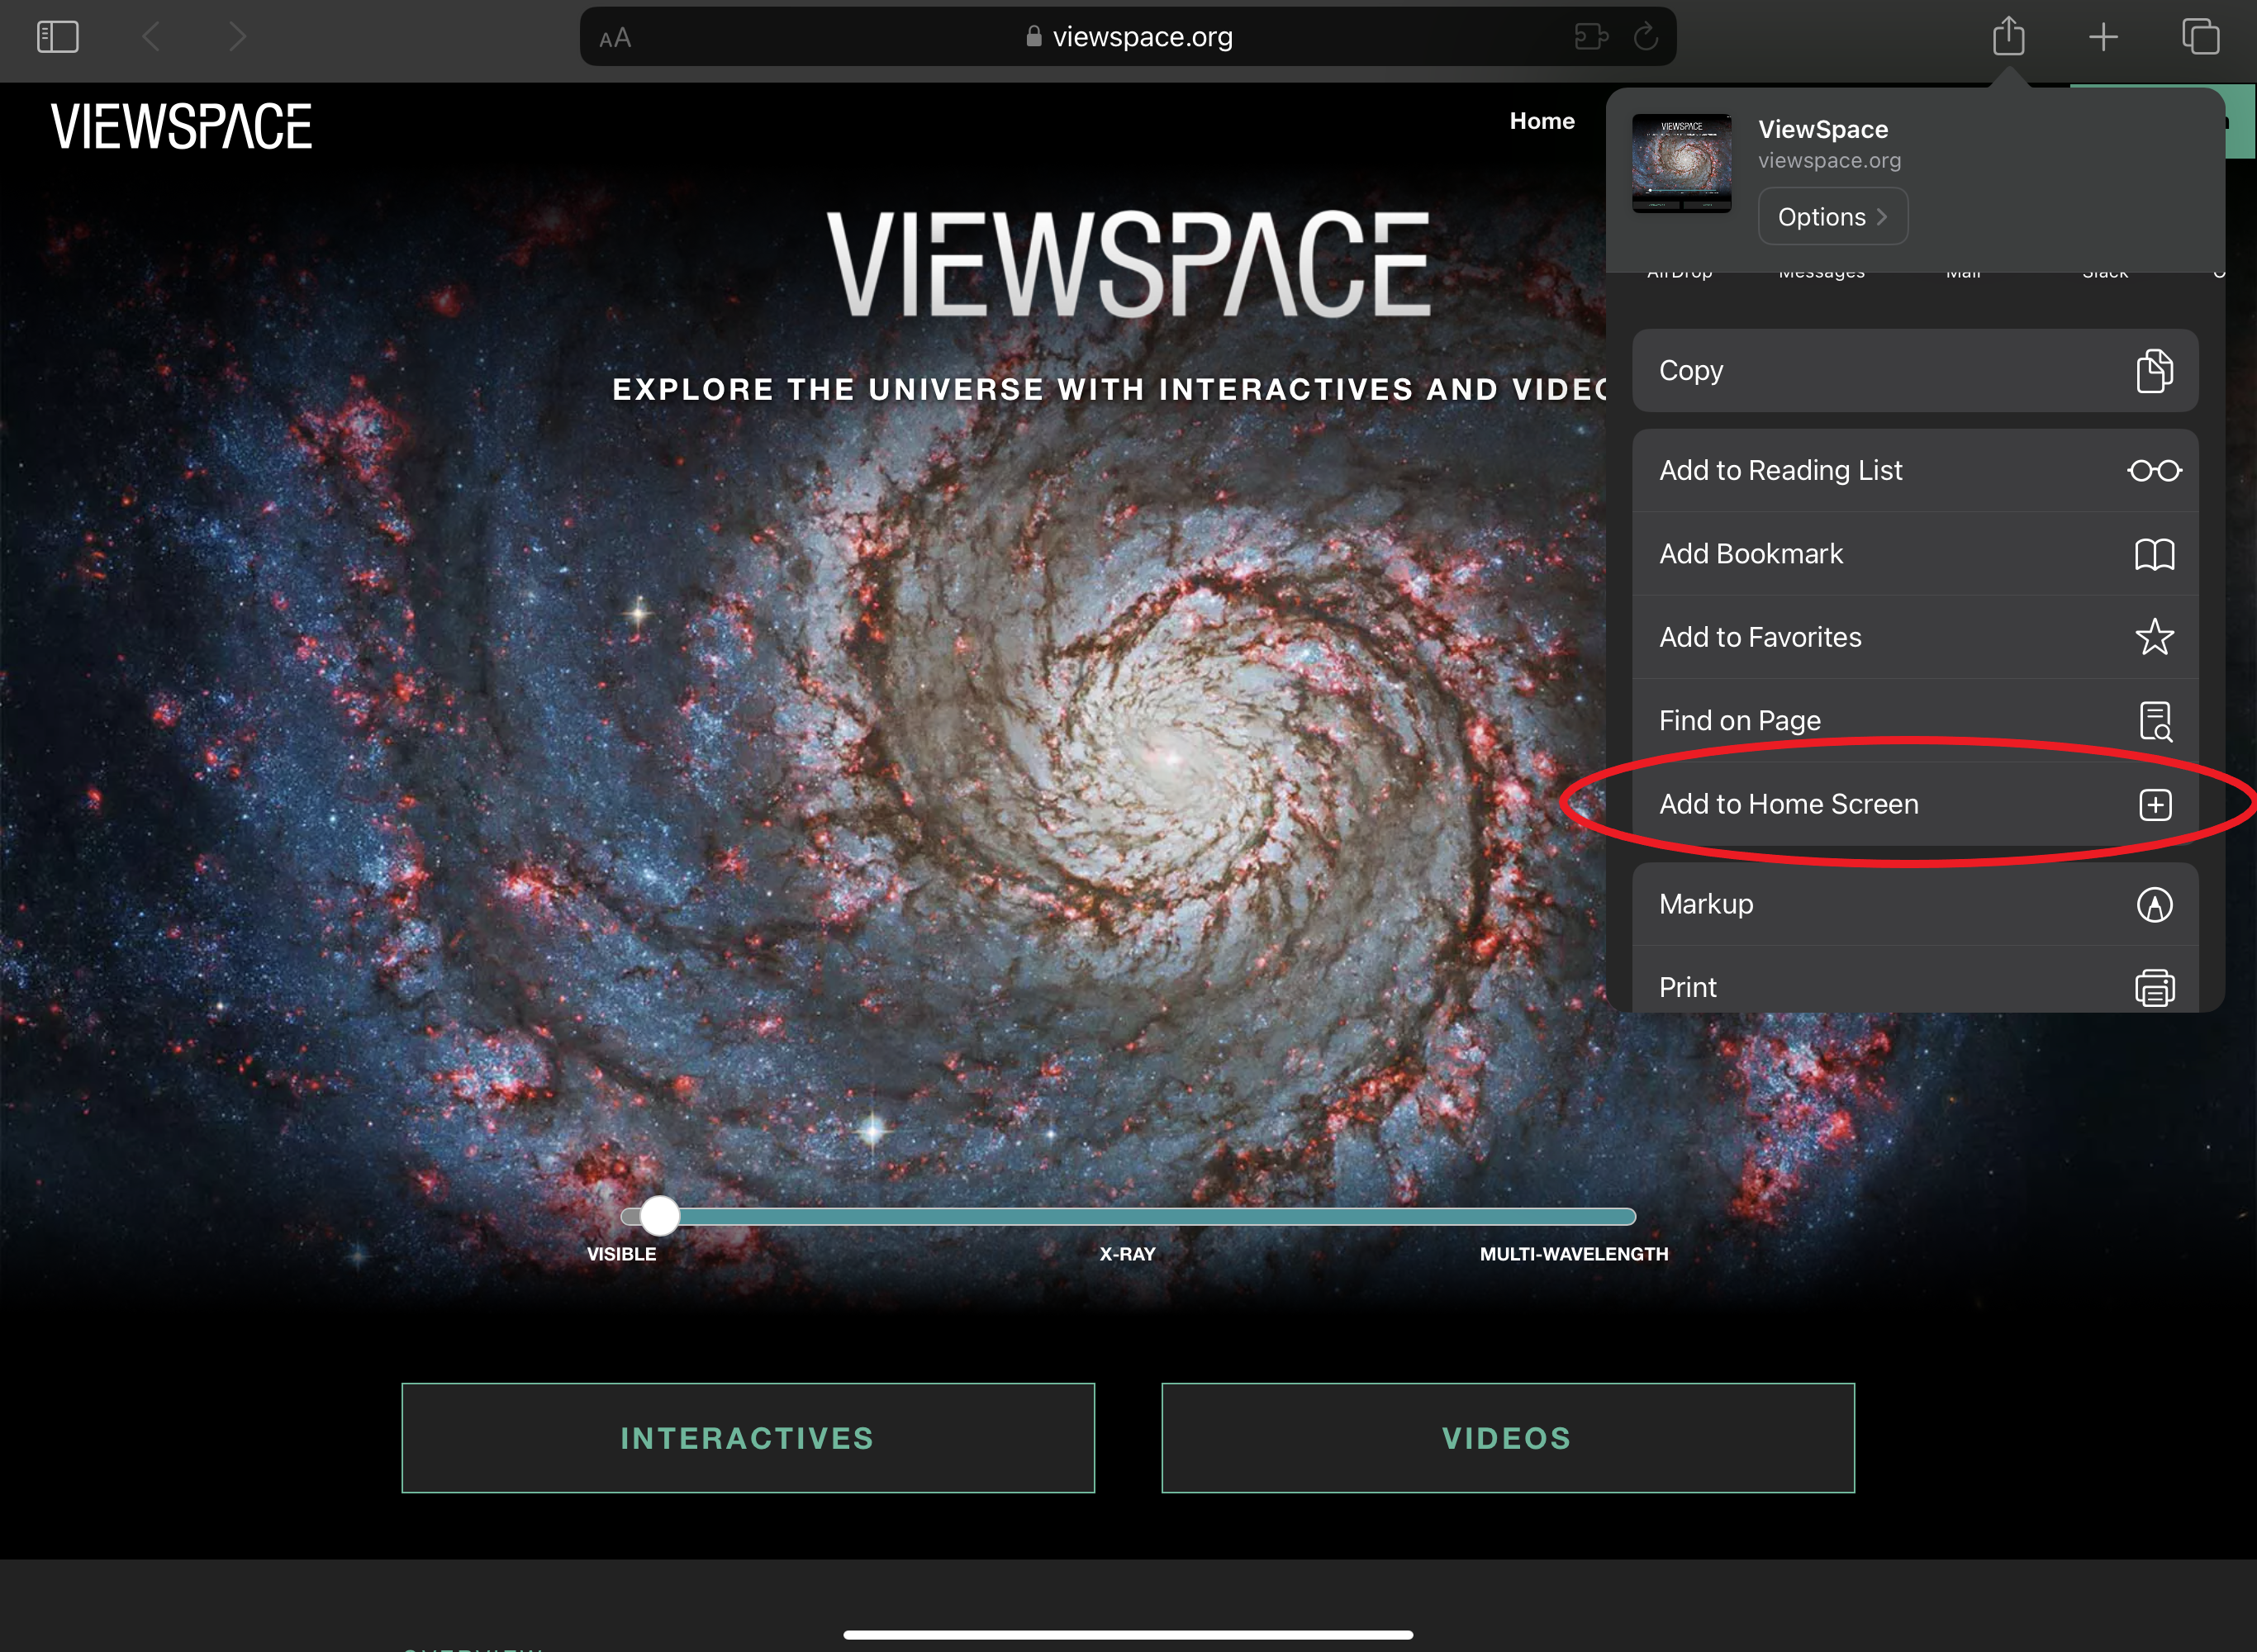 Screenshot of the ViewSpace home screen on Safari showing a dropdown menu. The option "Add to Home Screen" is circled in red.